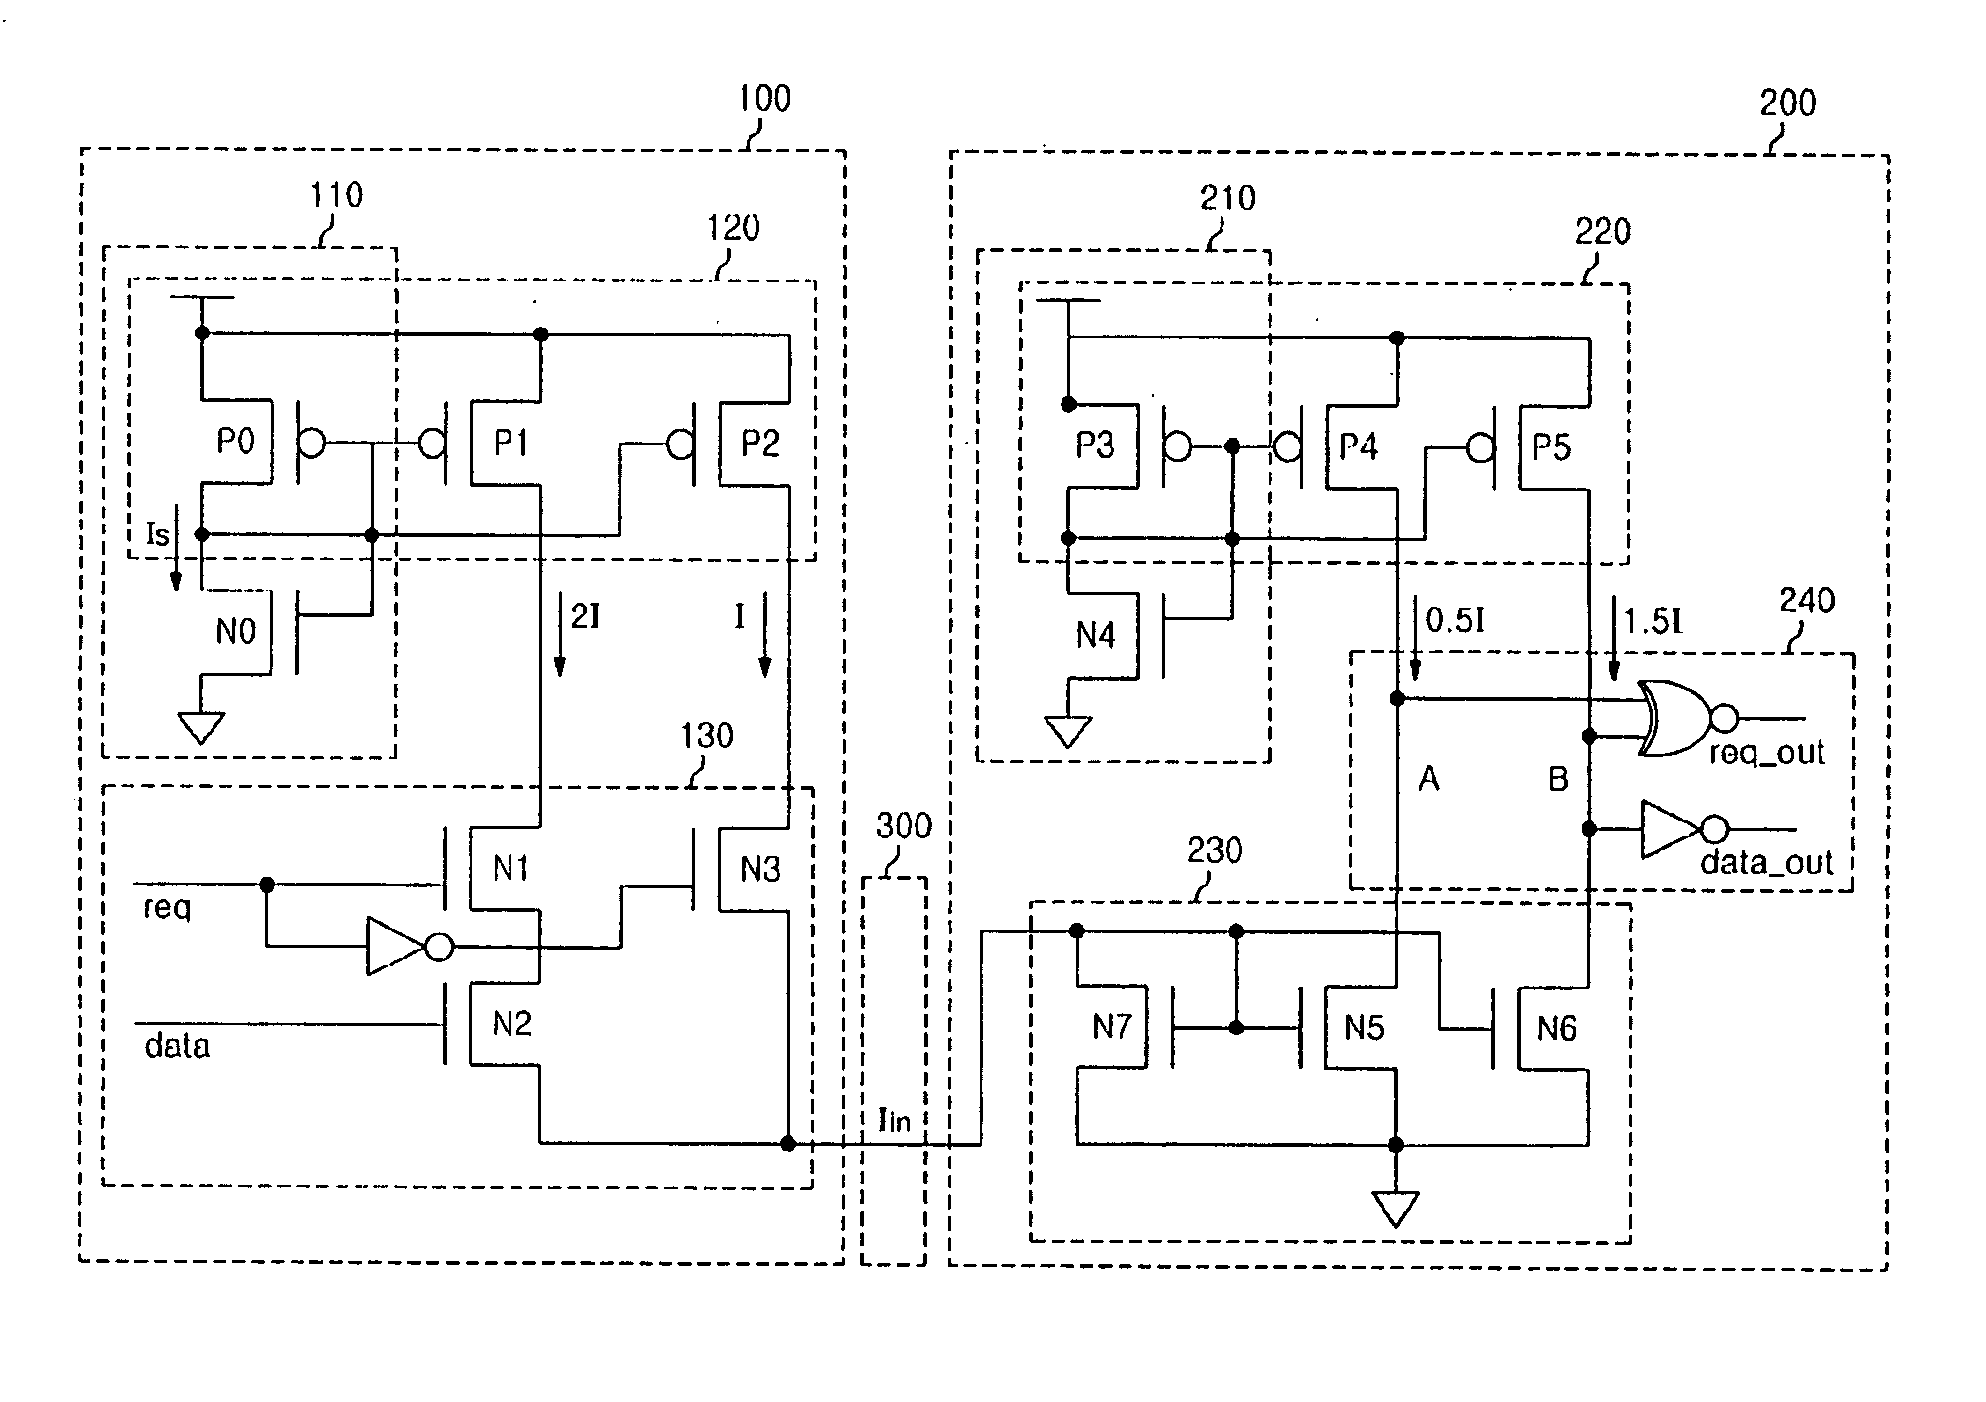 Delay-insensitive data transfer circuit using current-mode multiple-valued logic